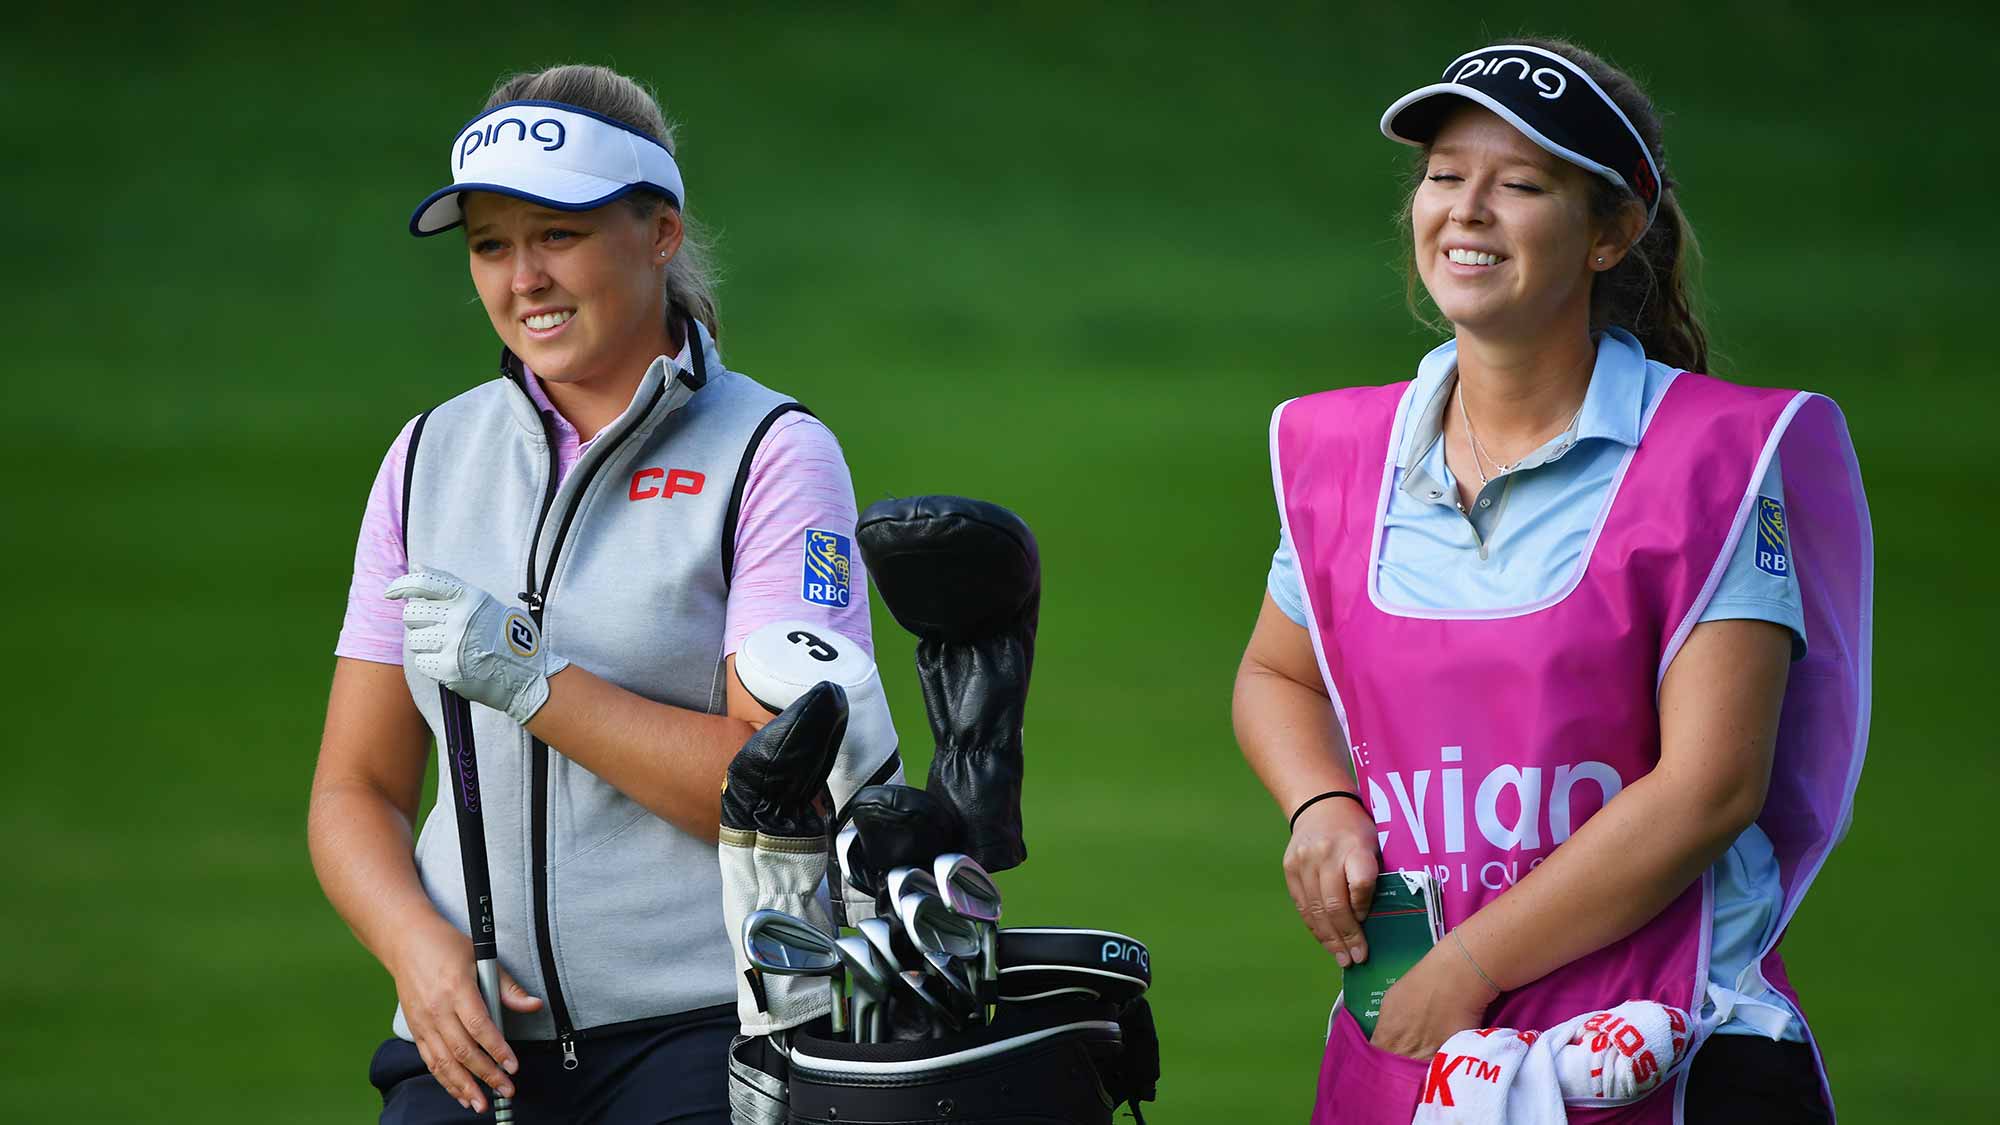 Brooke Henderson of Canada and caddie look on during day one of the Evian Championship at Evian Resort Golf Club on September 13, 2018 in Evian-les-Bains, France